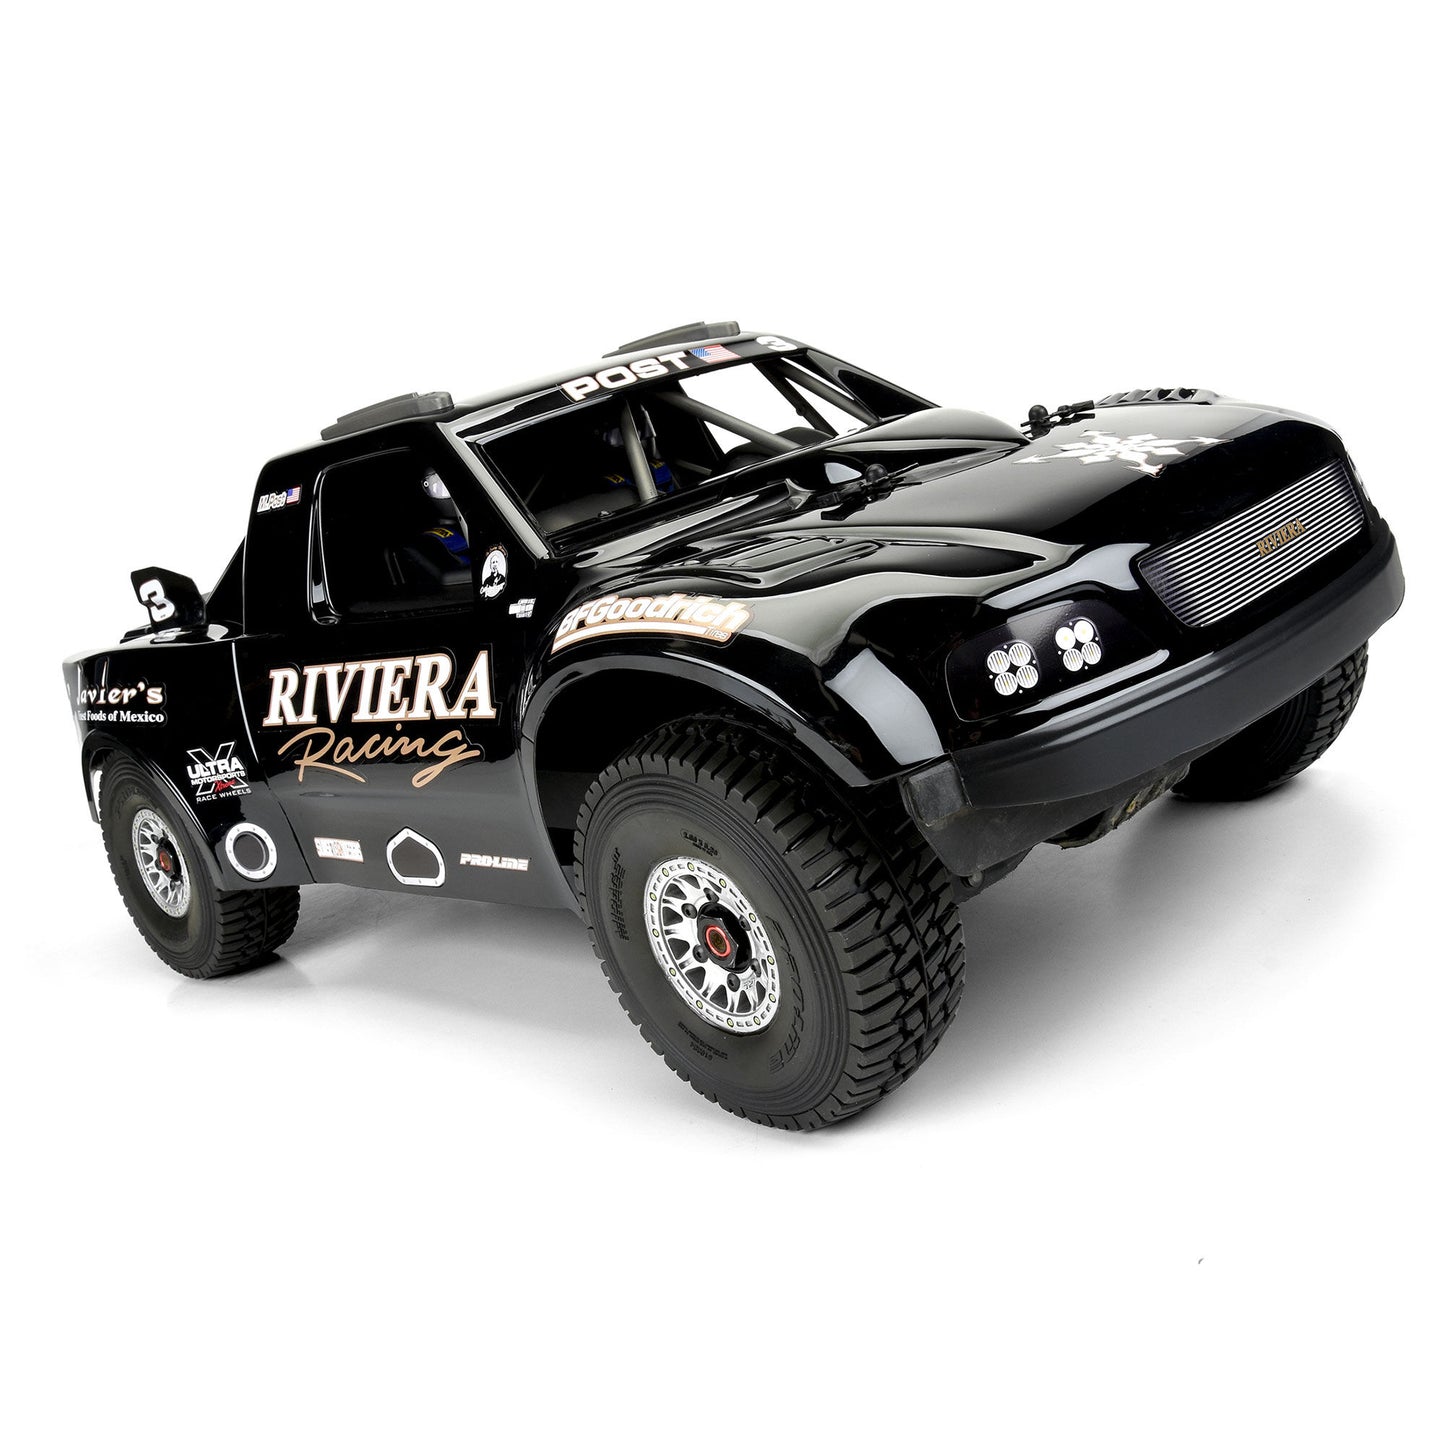 Pre-Cut 1997 Ford F-150 Trophy Truck “Riviera Edition” Tough Color (Black) Body for ARRMA Mojave 6S